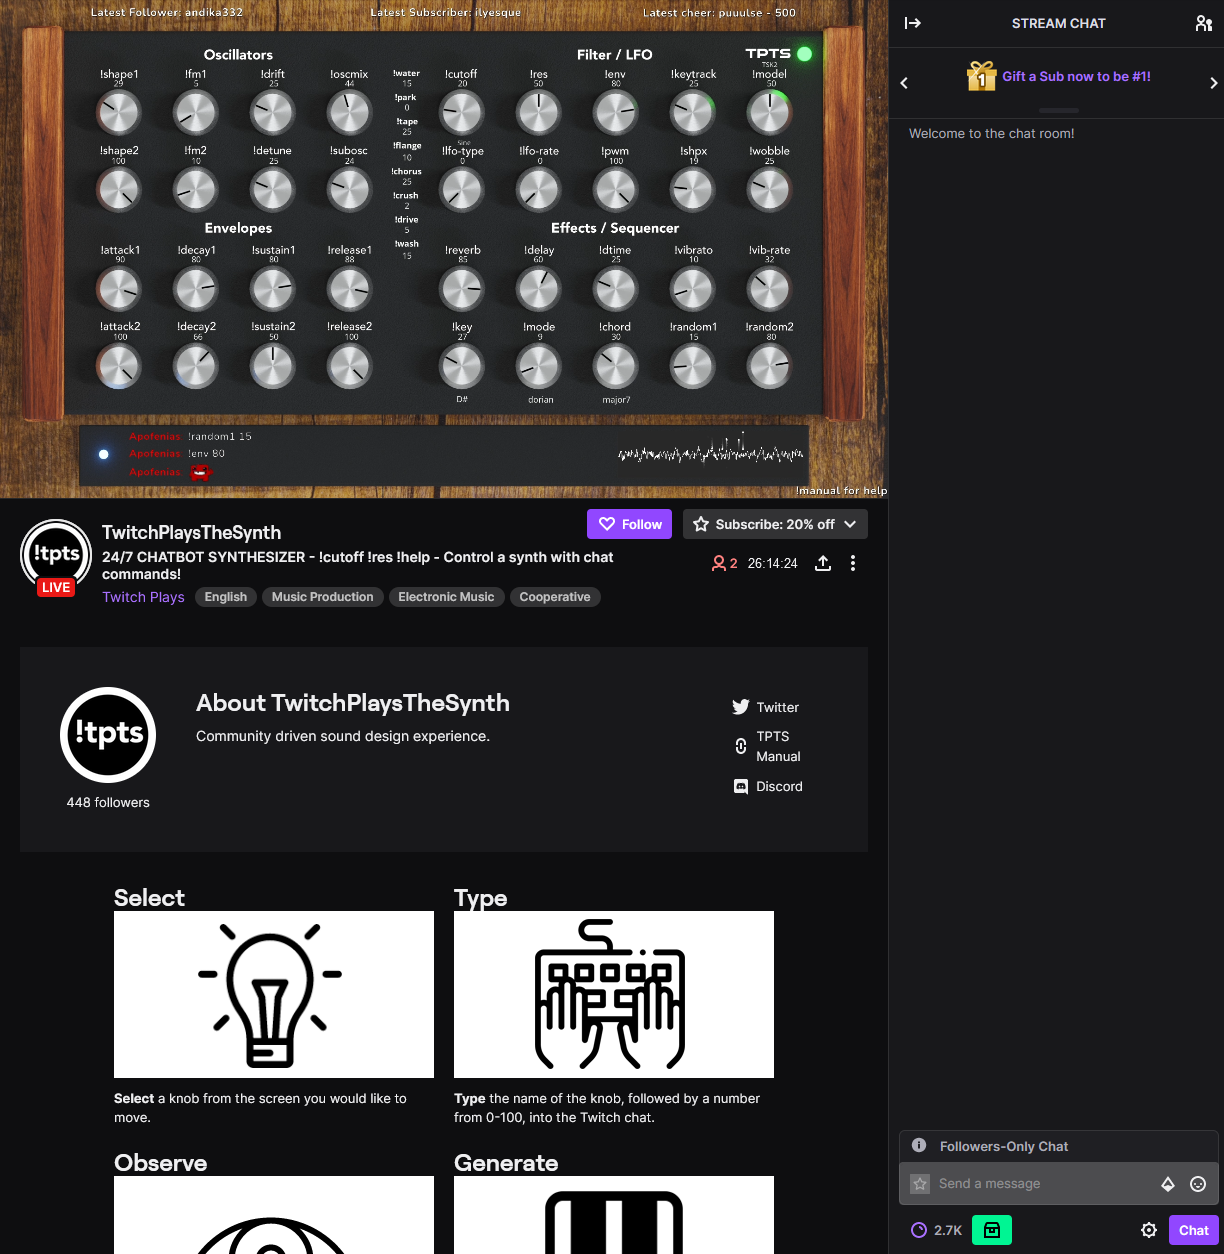 Twitch Plays the Synth